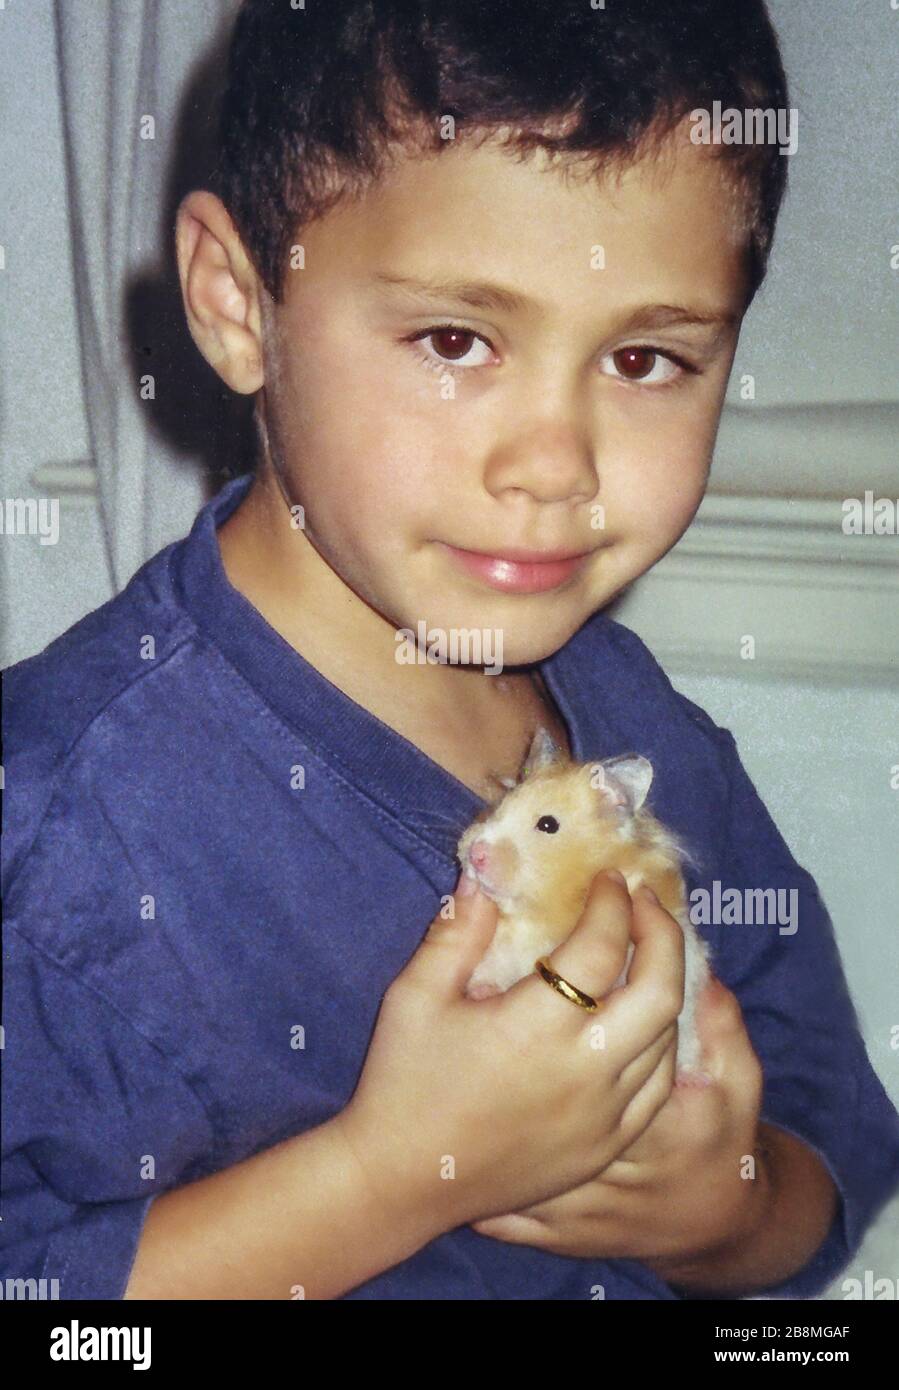 Young boy with hamster Stock Photo